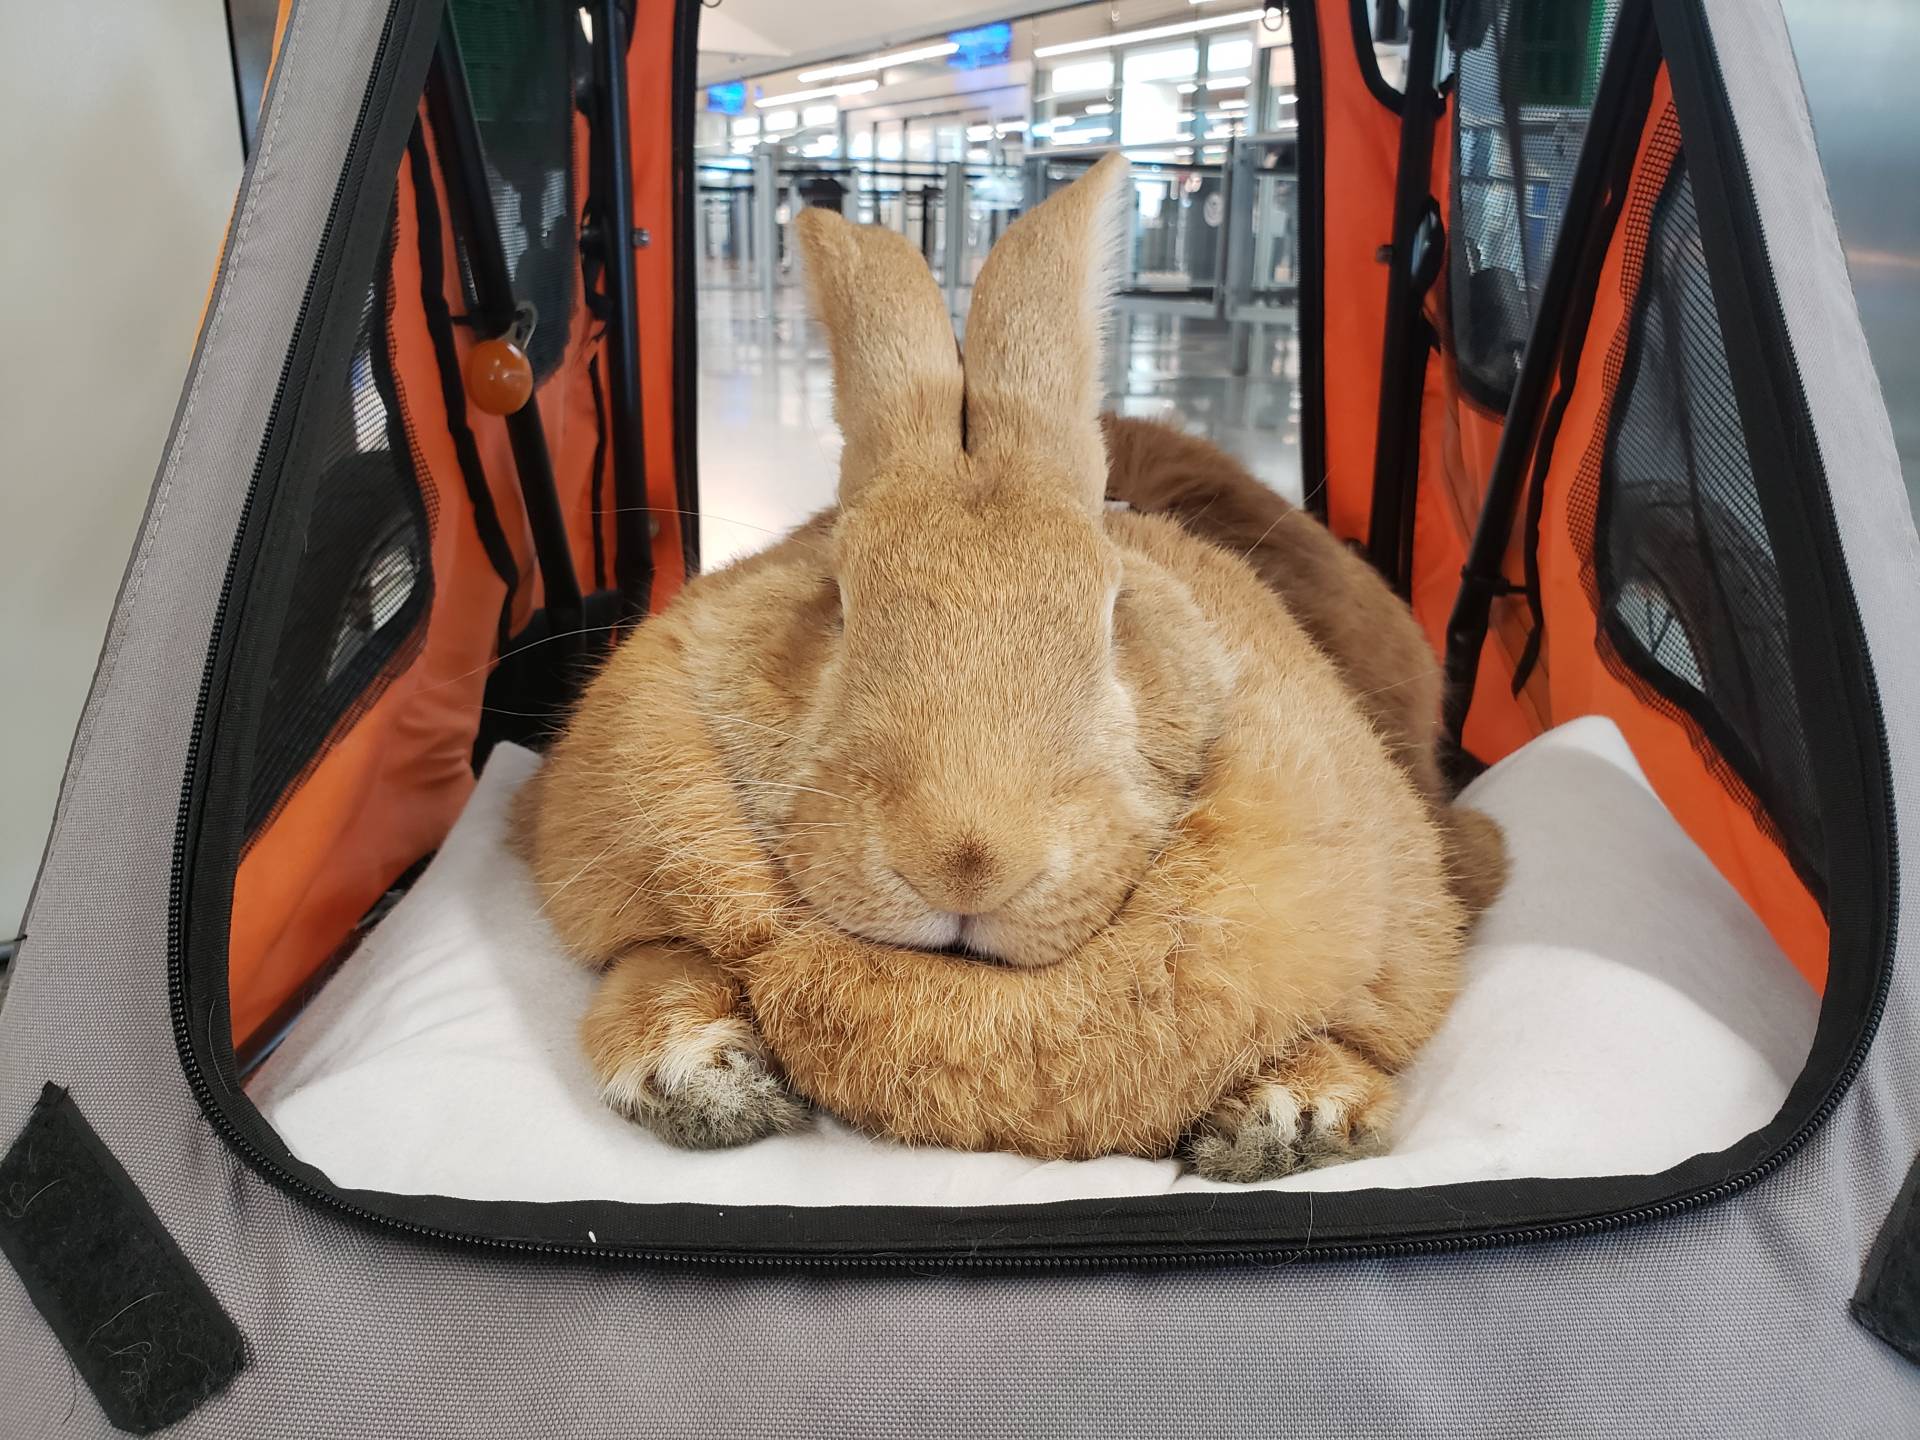 I Met SFO's Giant Rabbit Alex the Great, and Everything is Better